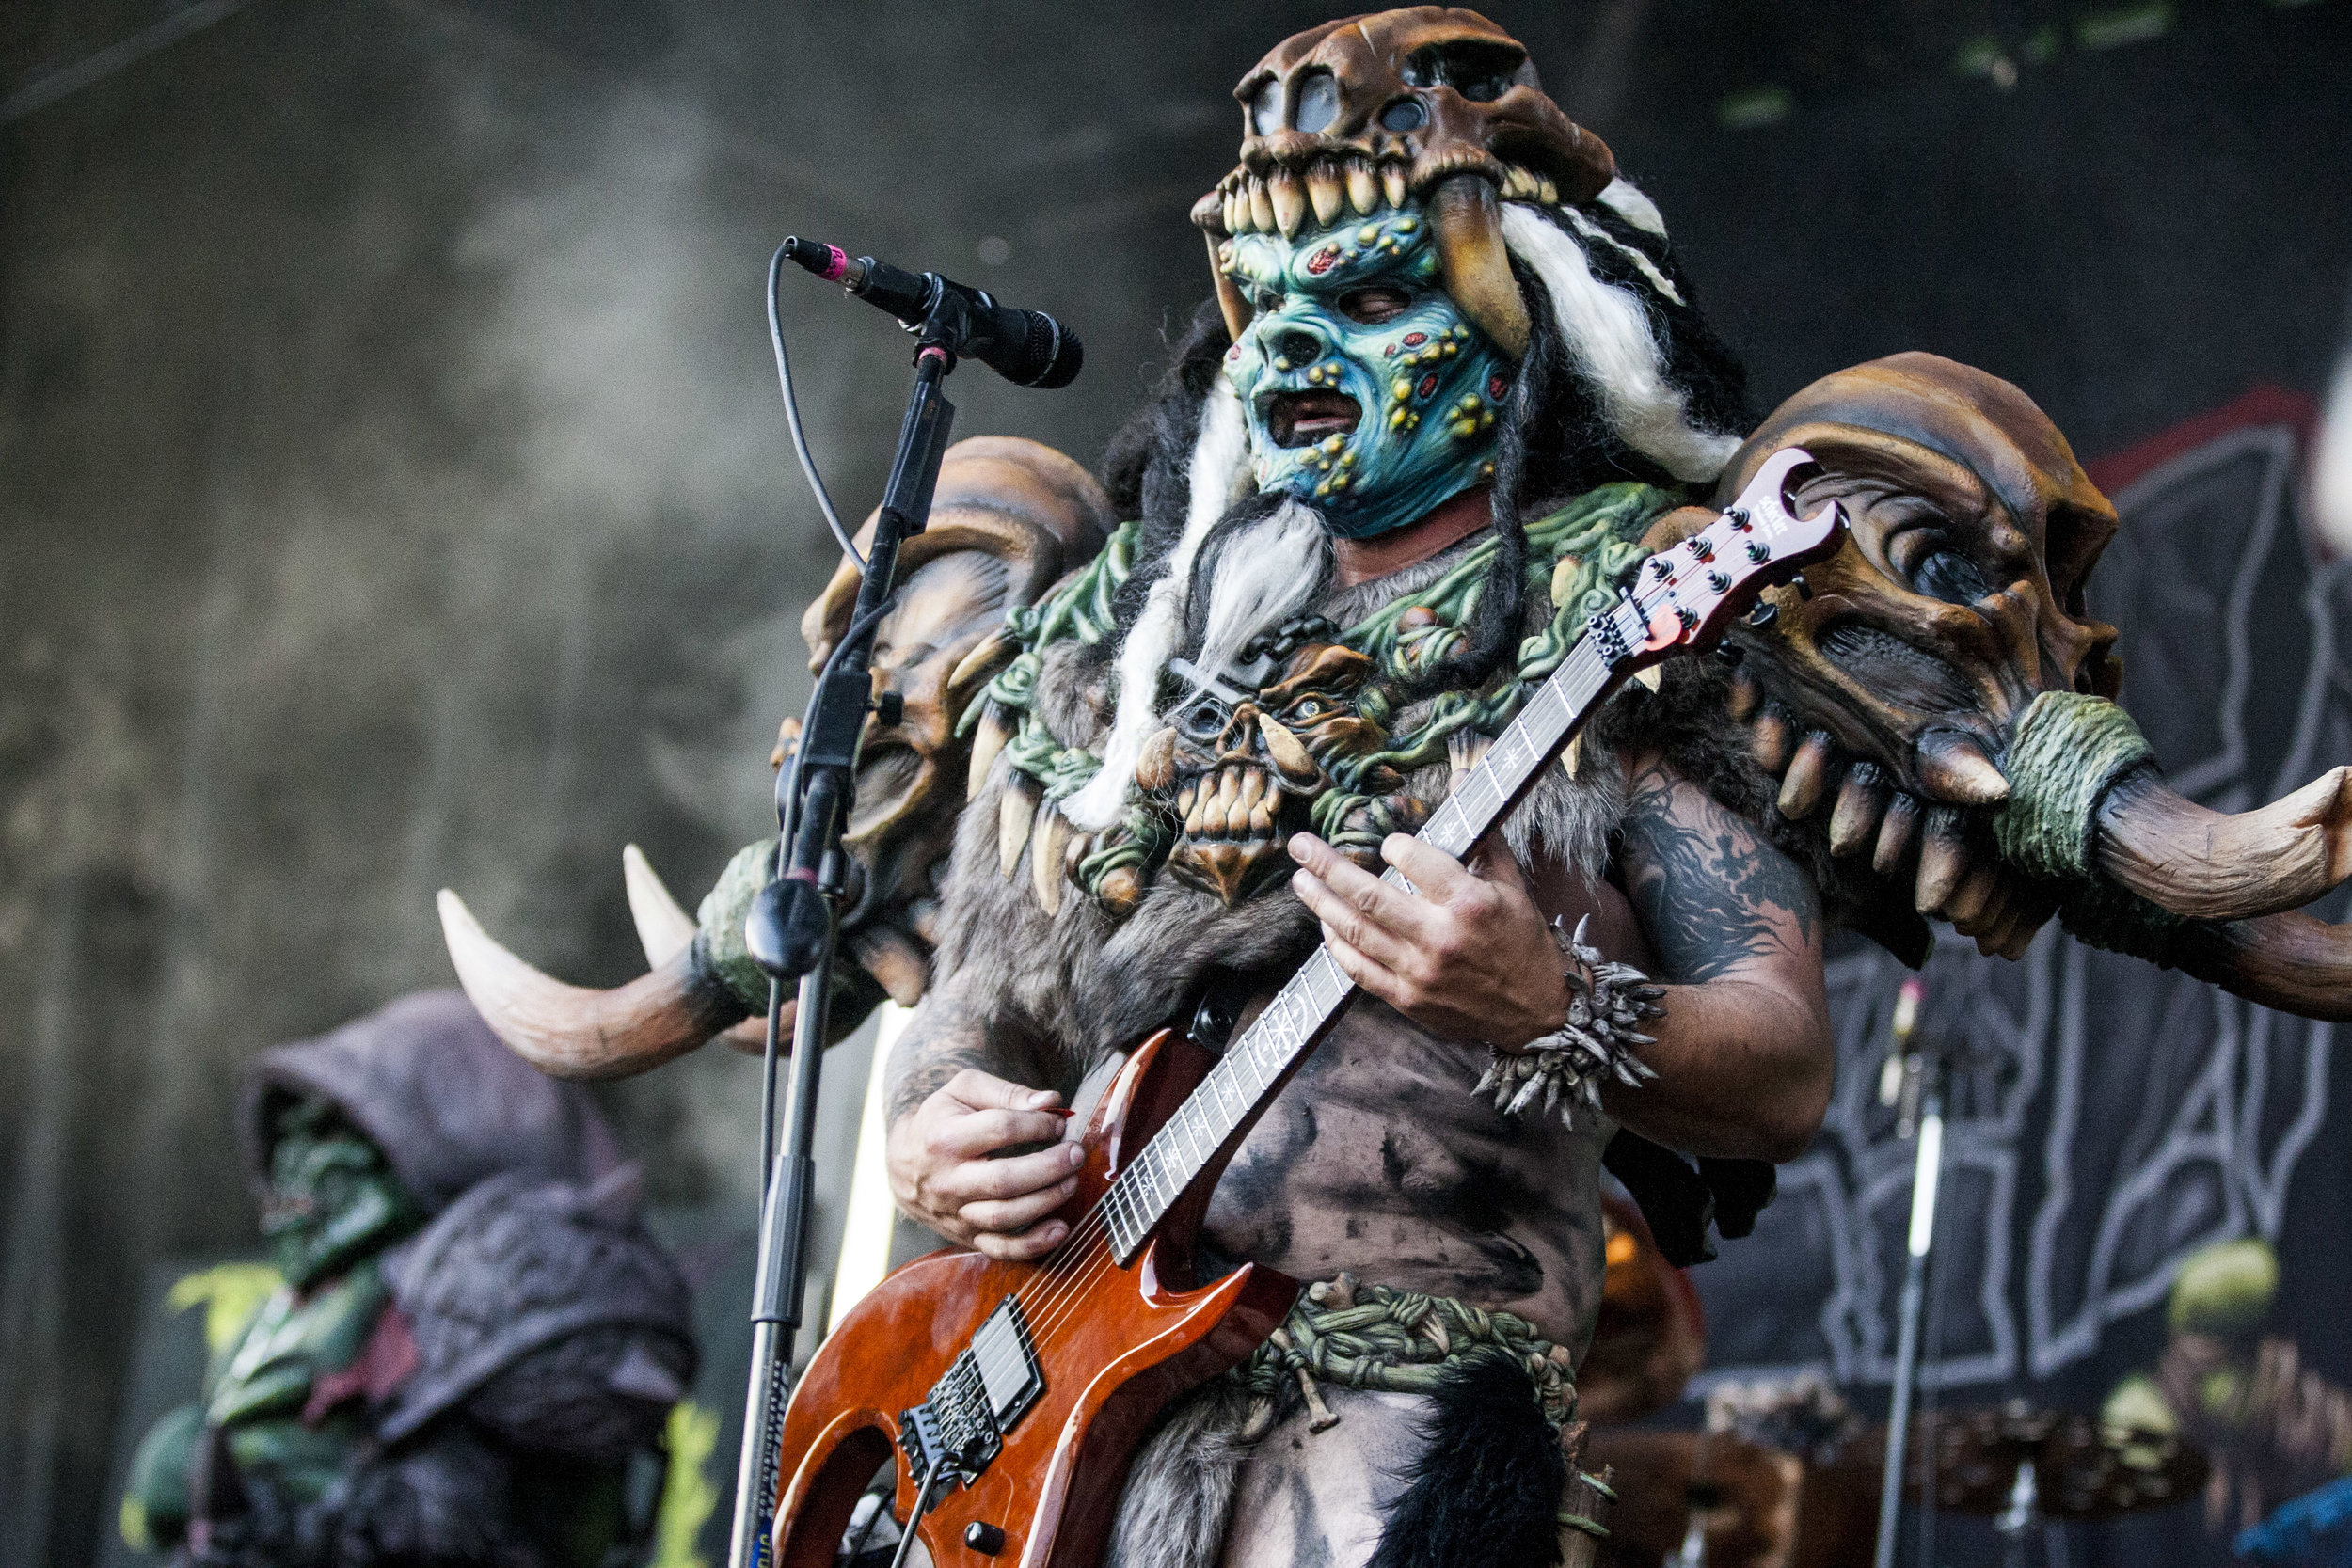  Brent Purgason (Pustulus Maximus) of GWAR performs at Vans Warped Tour at the Hard Rock Hotel and Casino on Friday, June 23, 2017.  Patrick Connolly Las Vegas Review-Journal @PConnPie 